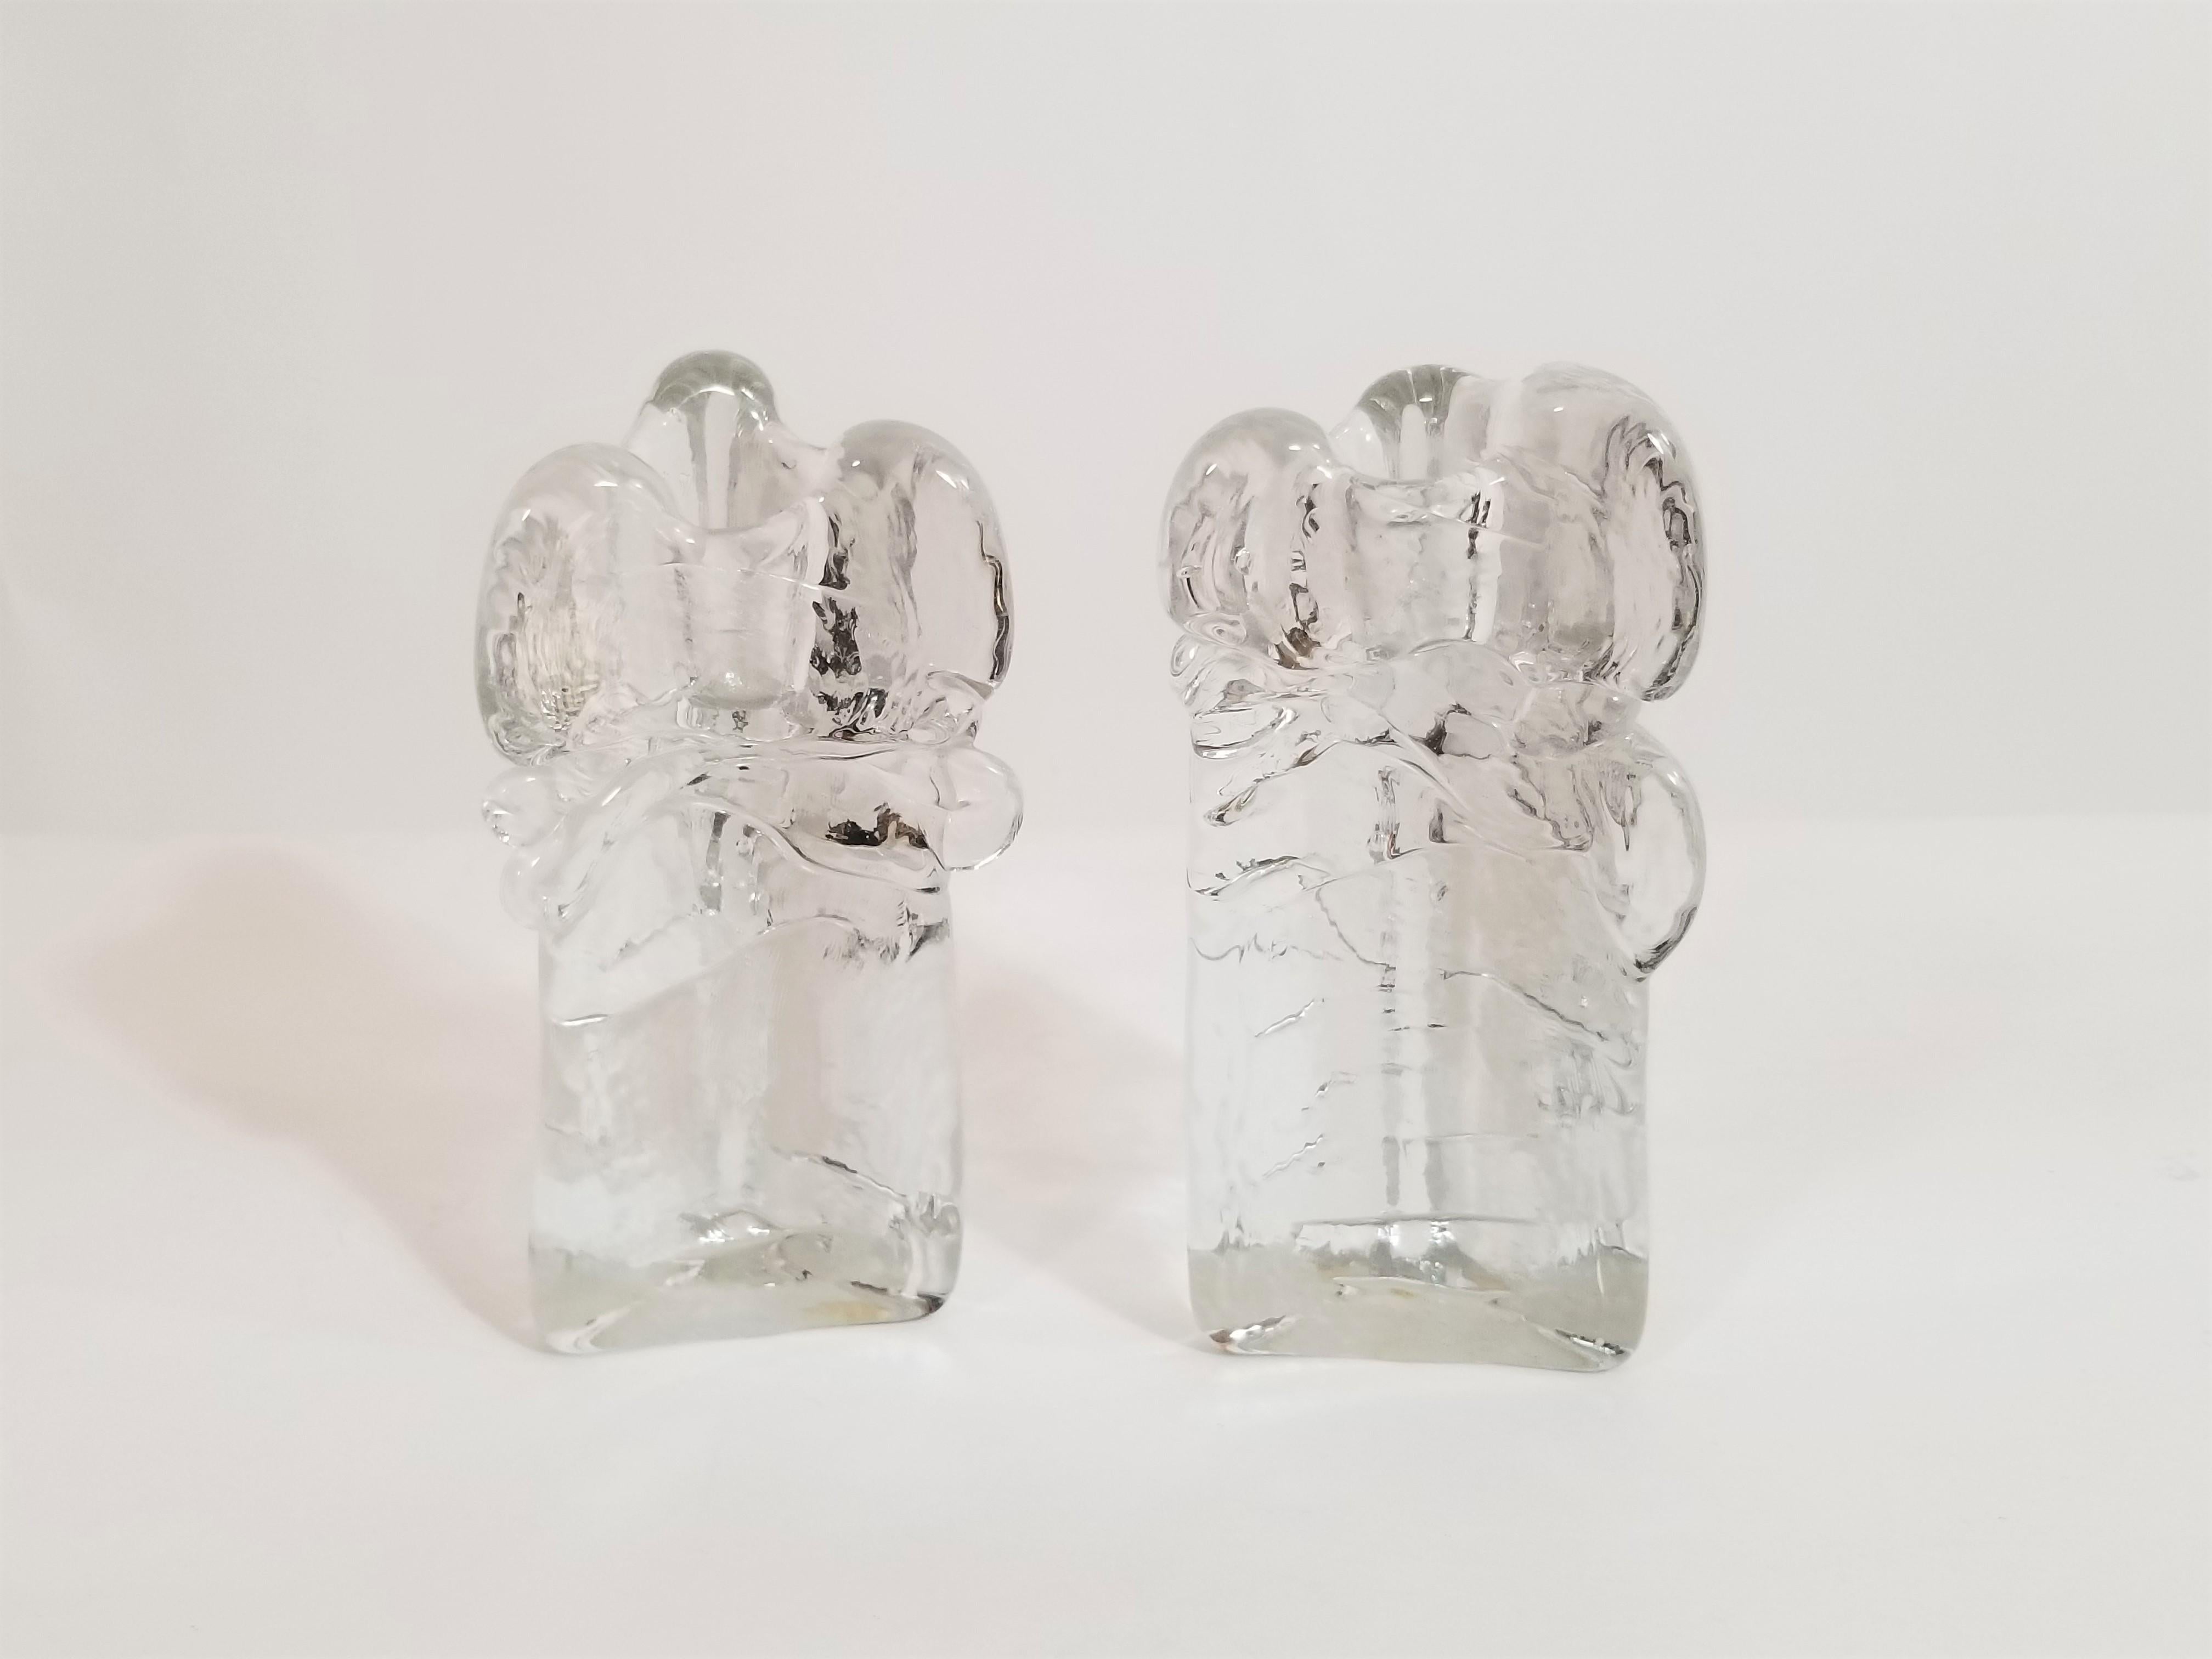 Iittala, Finland Pair of Art Glass Candleholders For Sale 4